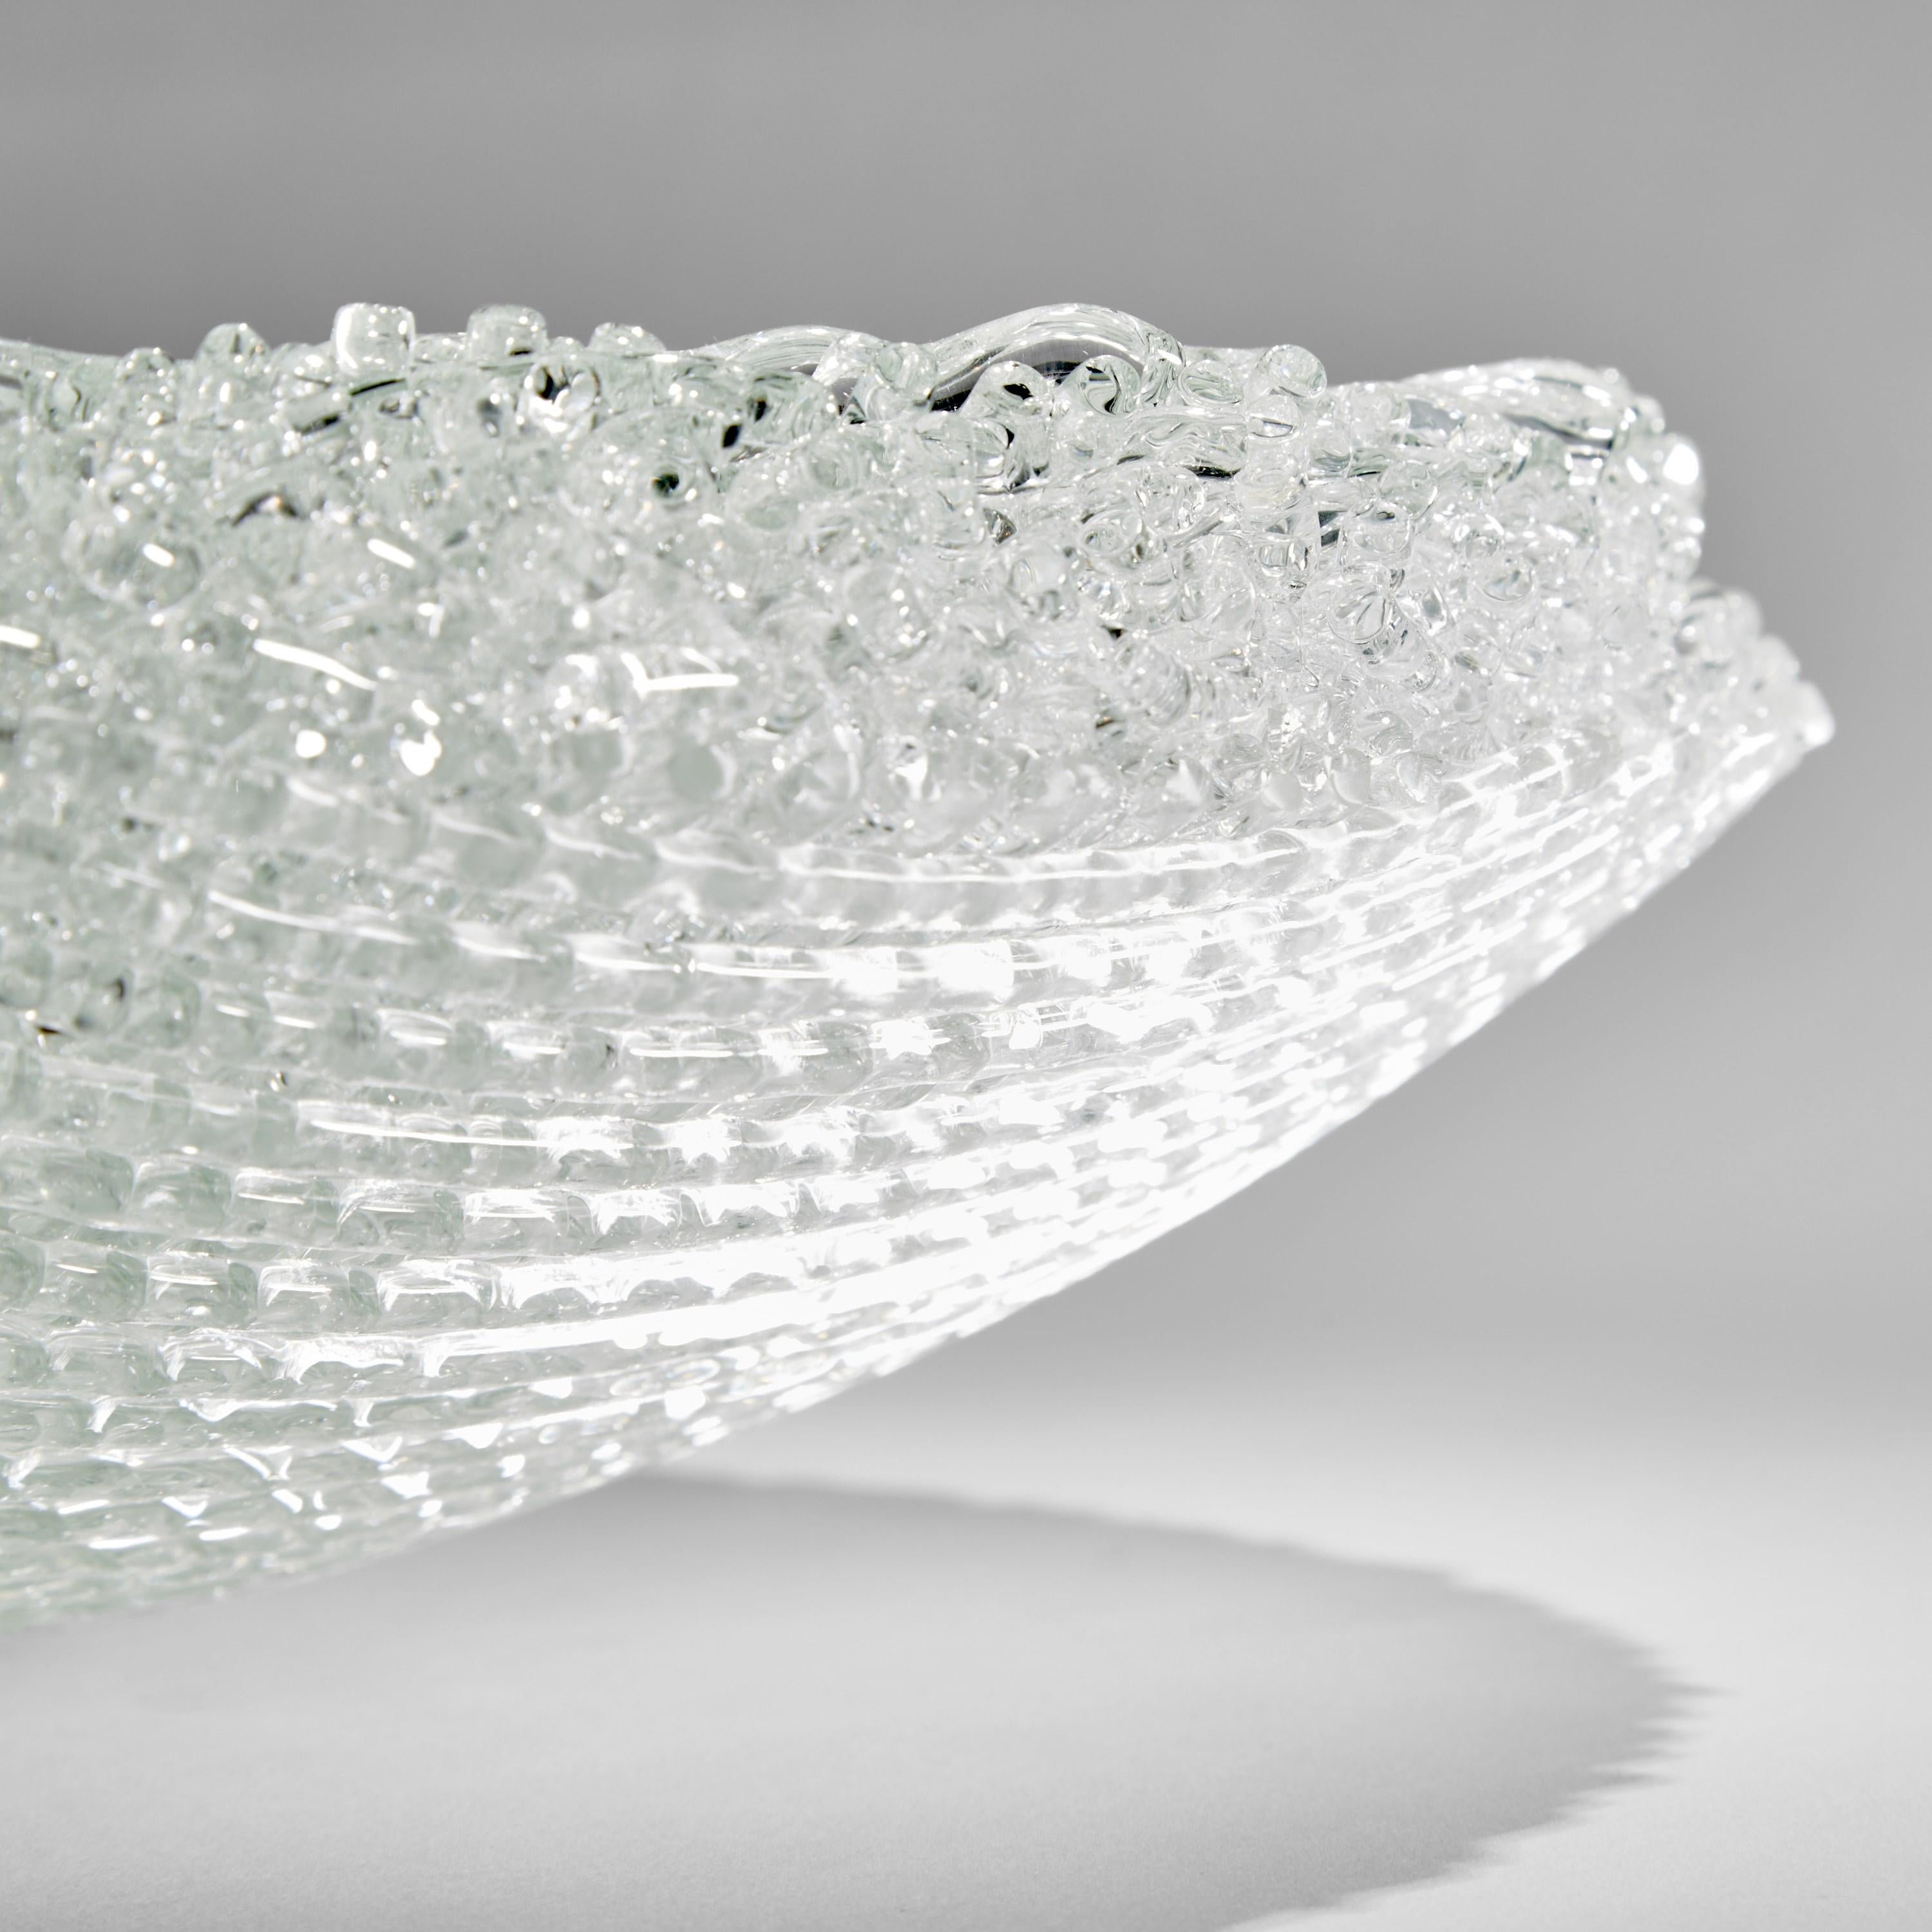 British  Enceladus, Unique Woven Clear Glass Sculptural Centrepiece by Cathryn Shilling For Sale